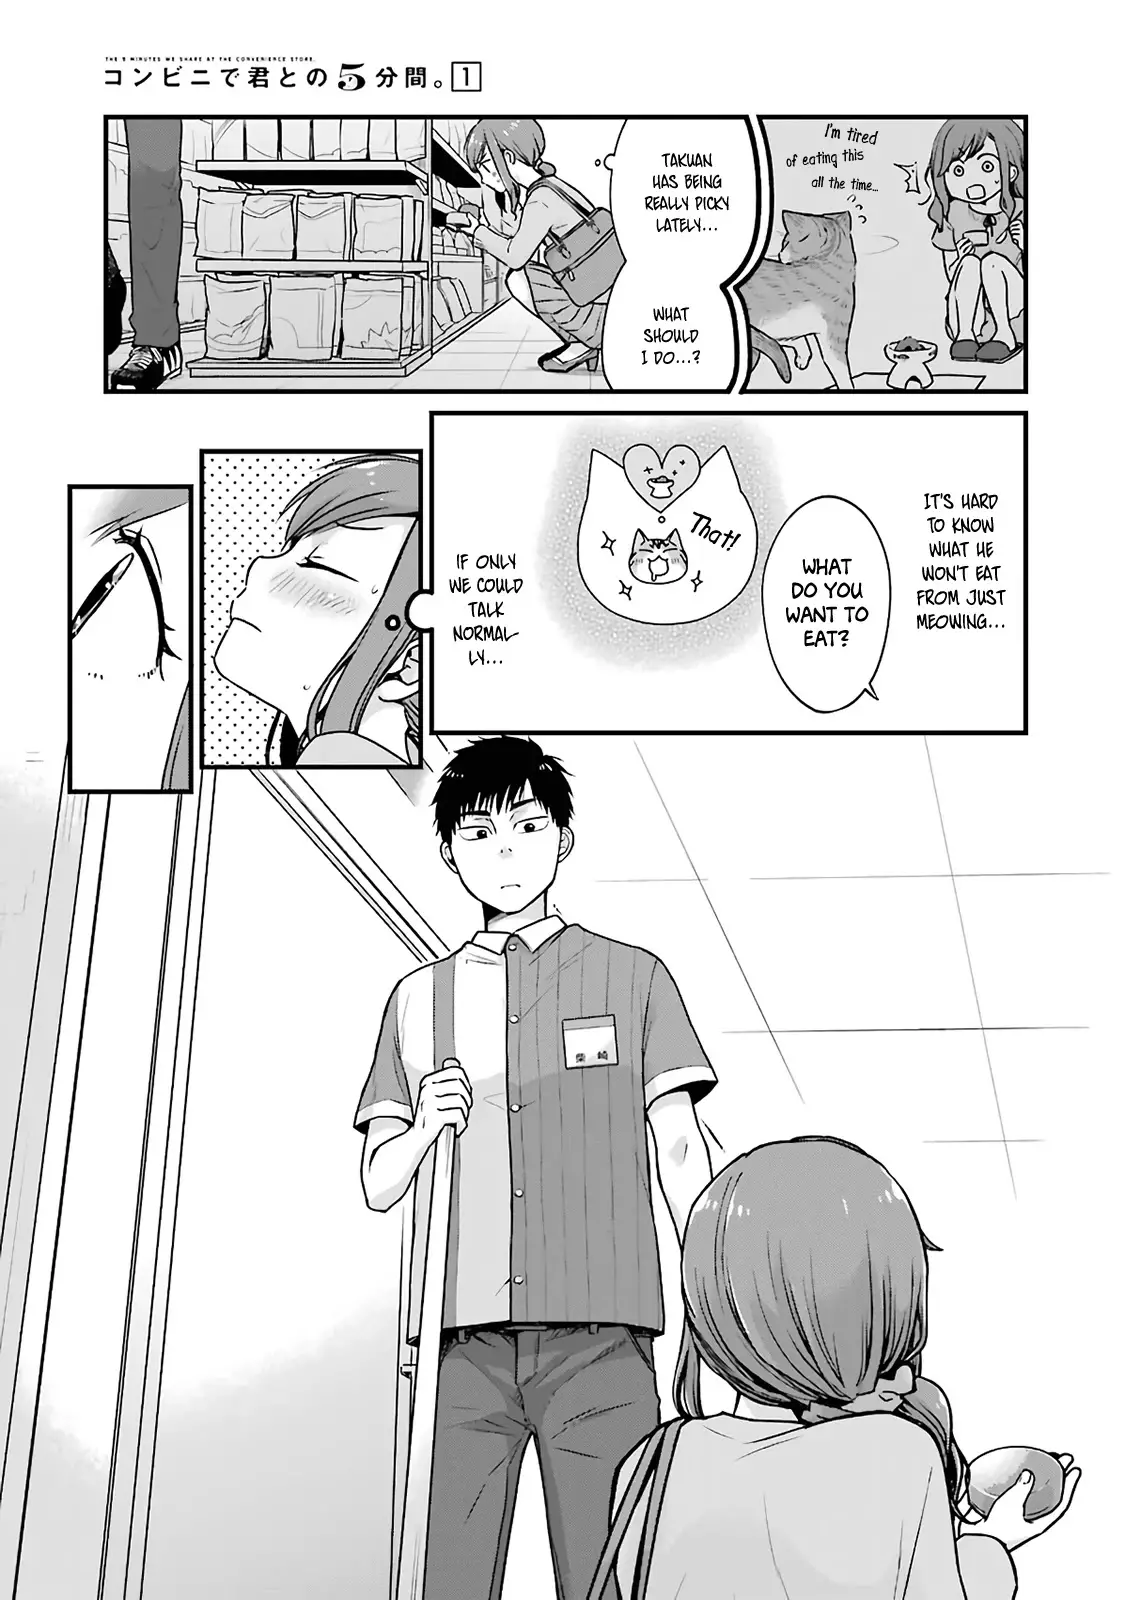 5 Minutes With You At A Convenience Store - 3 page 3